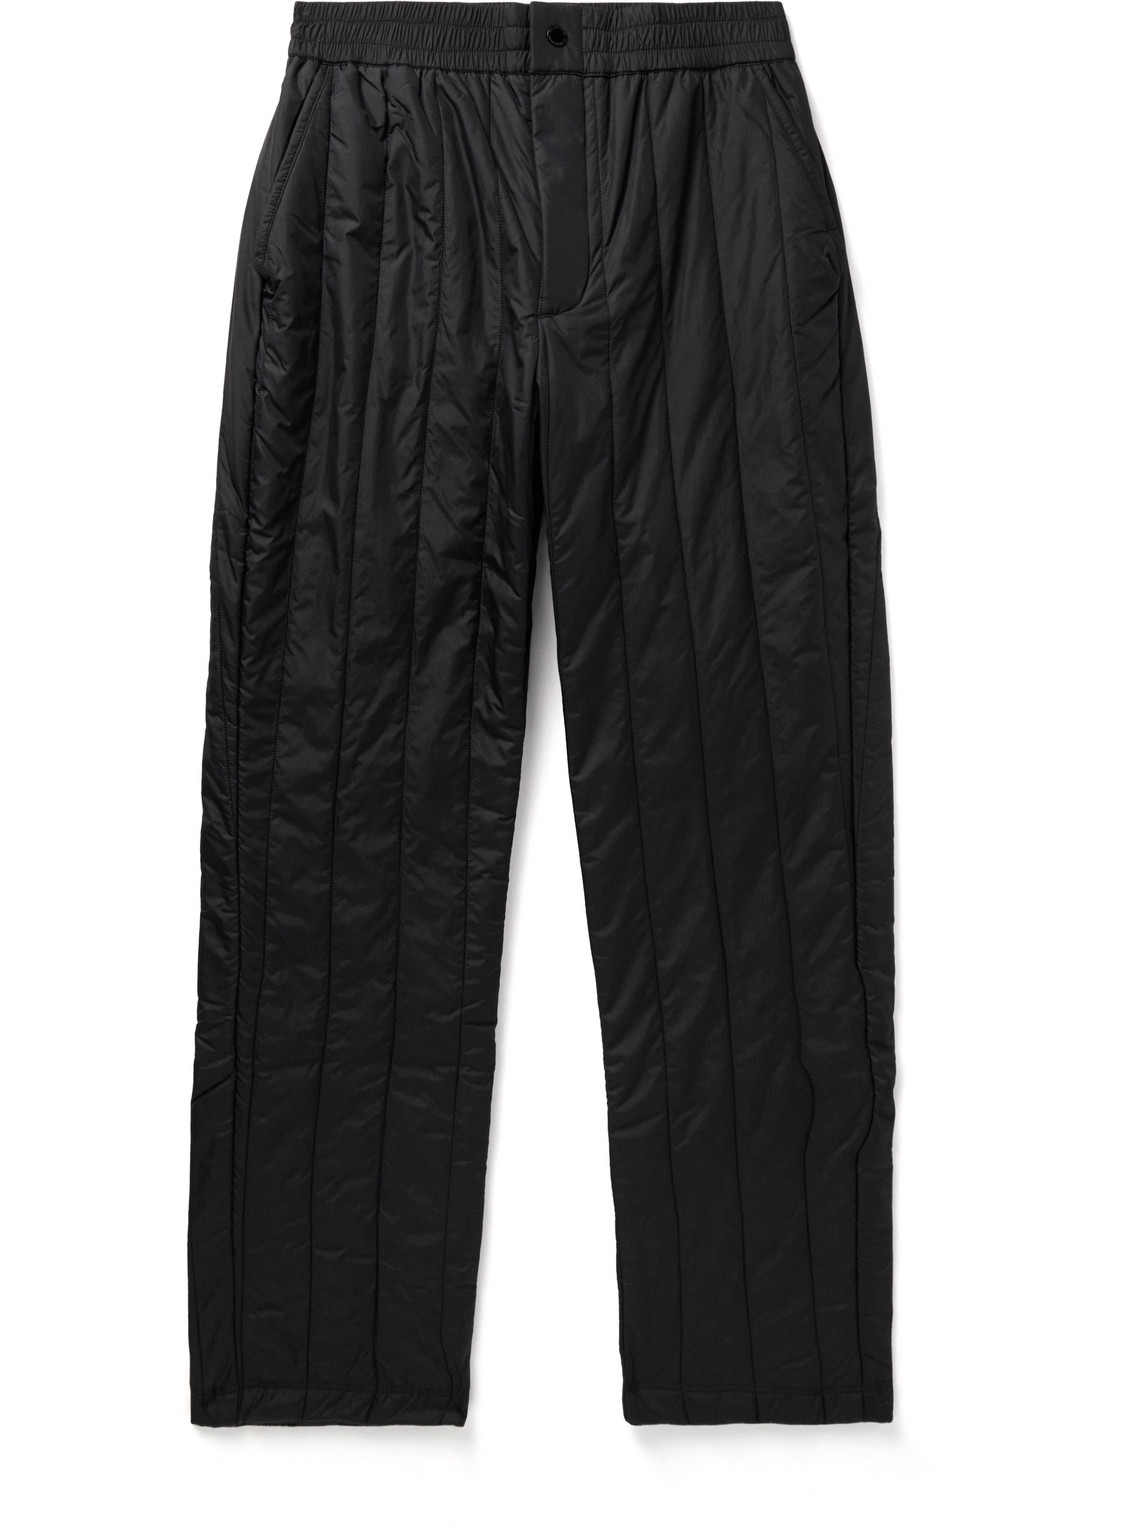 Canada Goose - Carlyle Logo-Appliquéd Quilted Padded Shell Trousers - Men - Black - XXL von Canada Goose